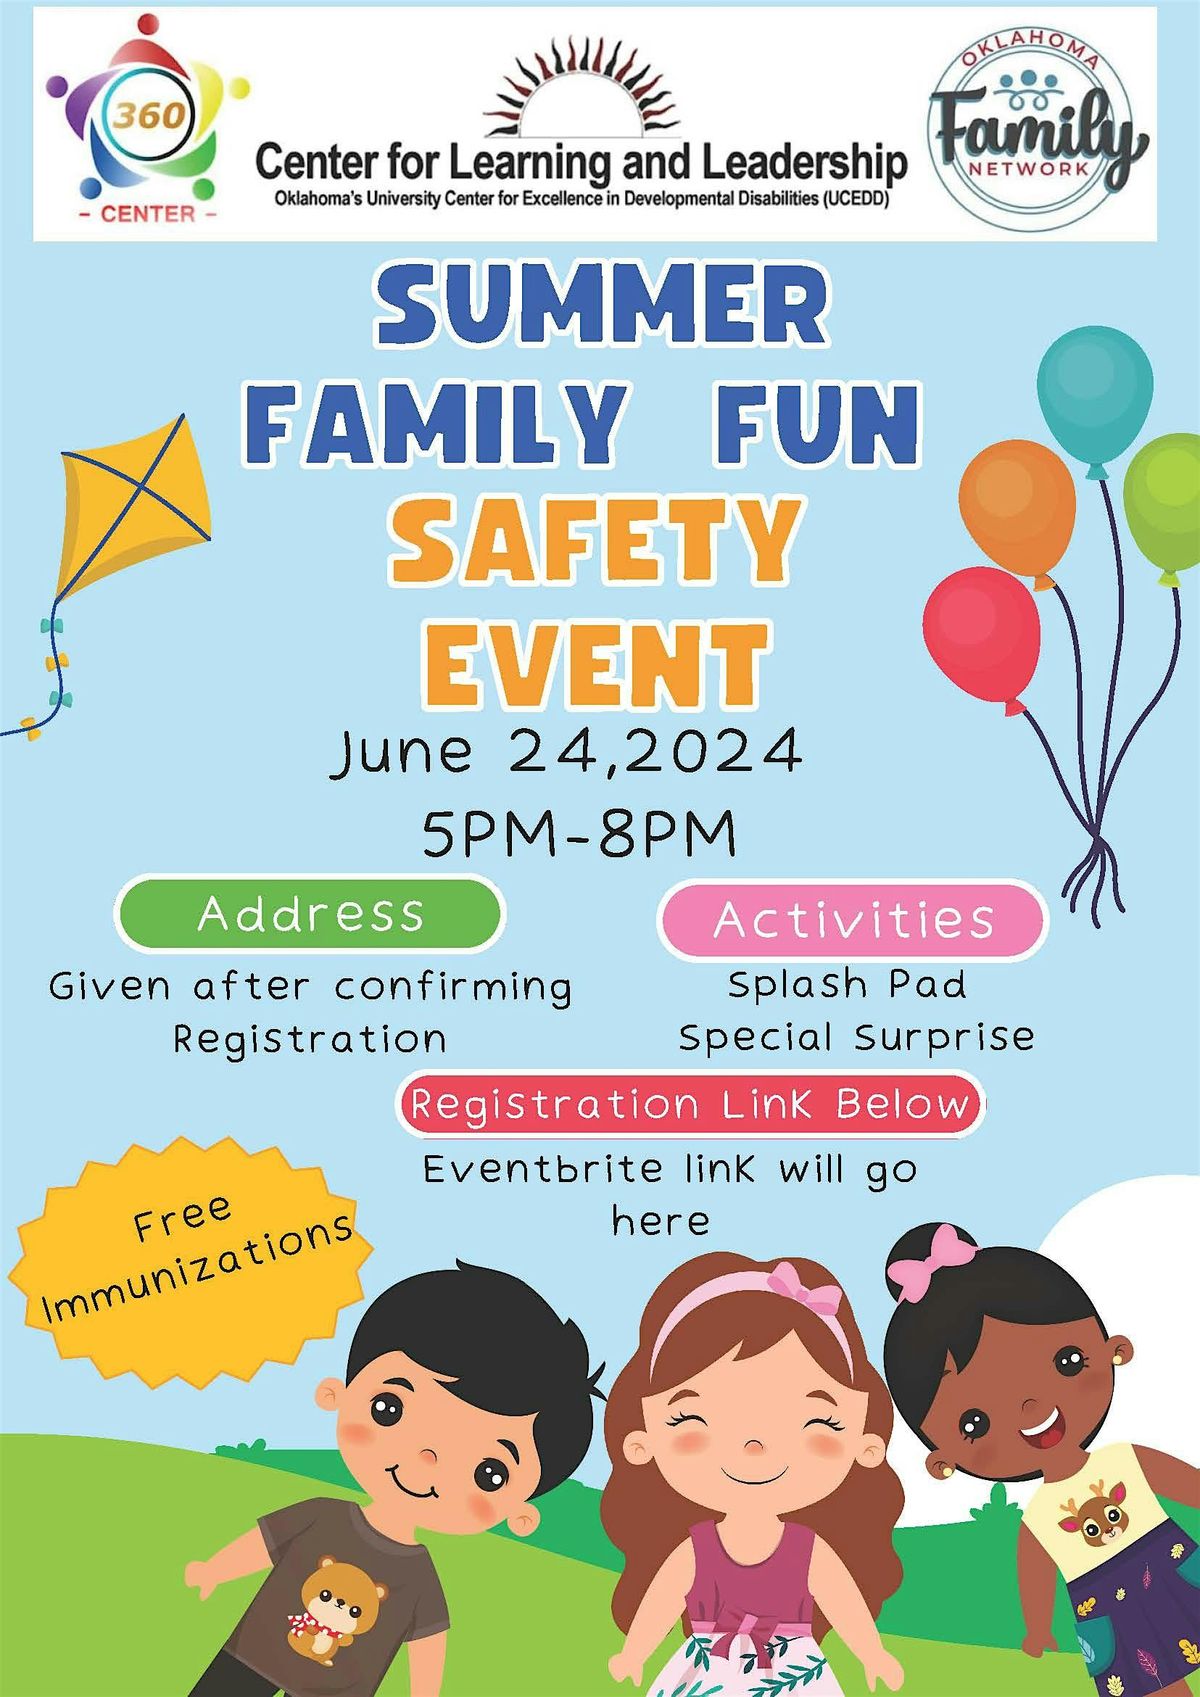 SUMMER  FAMILY FUN SAFETY EVENT